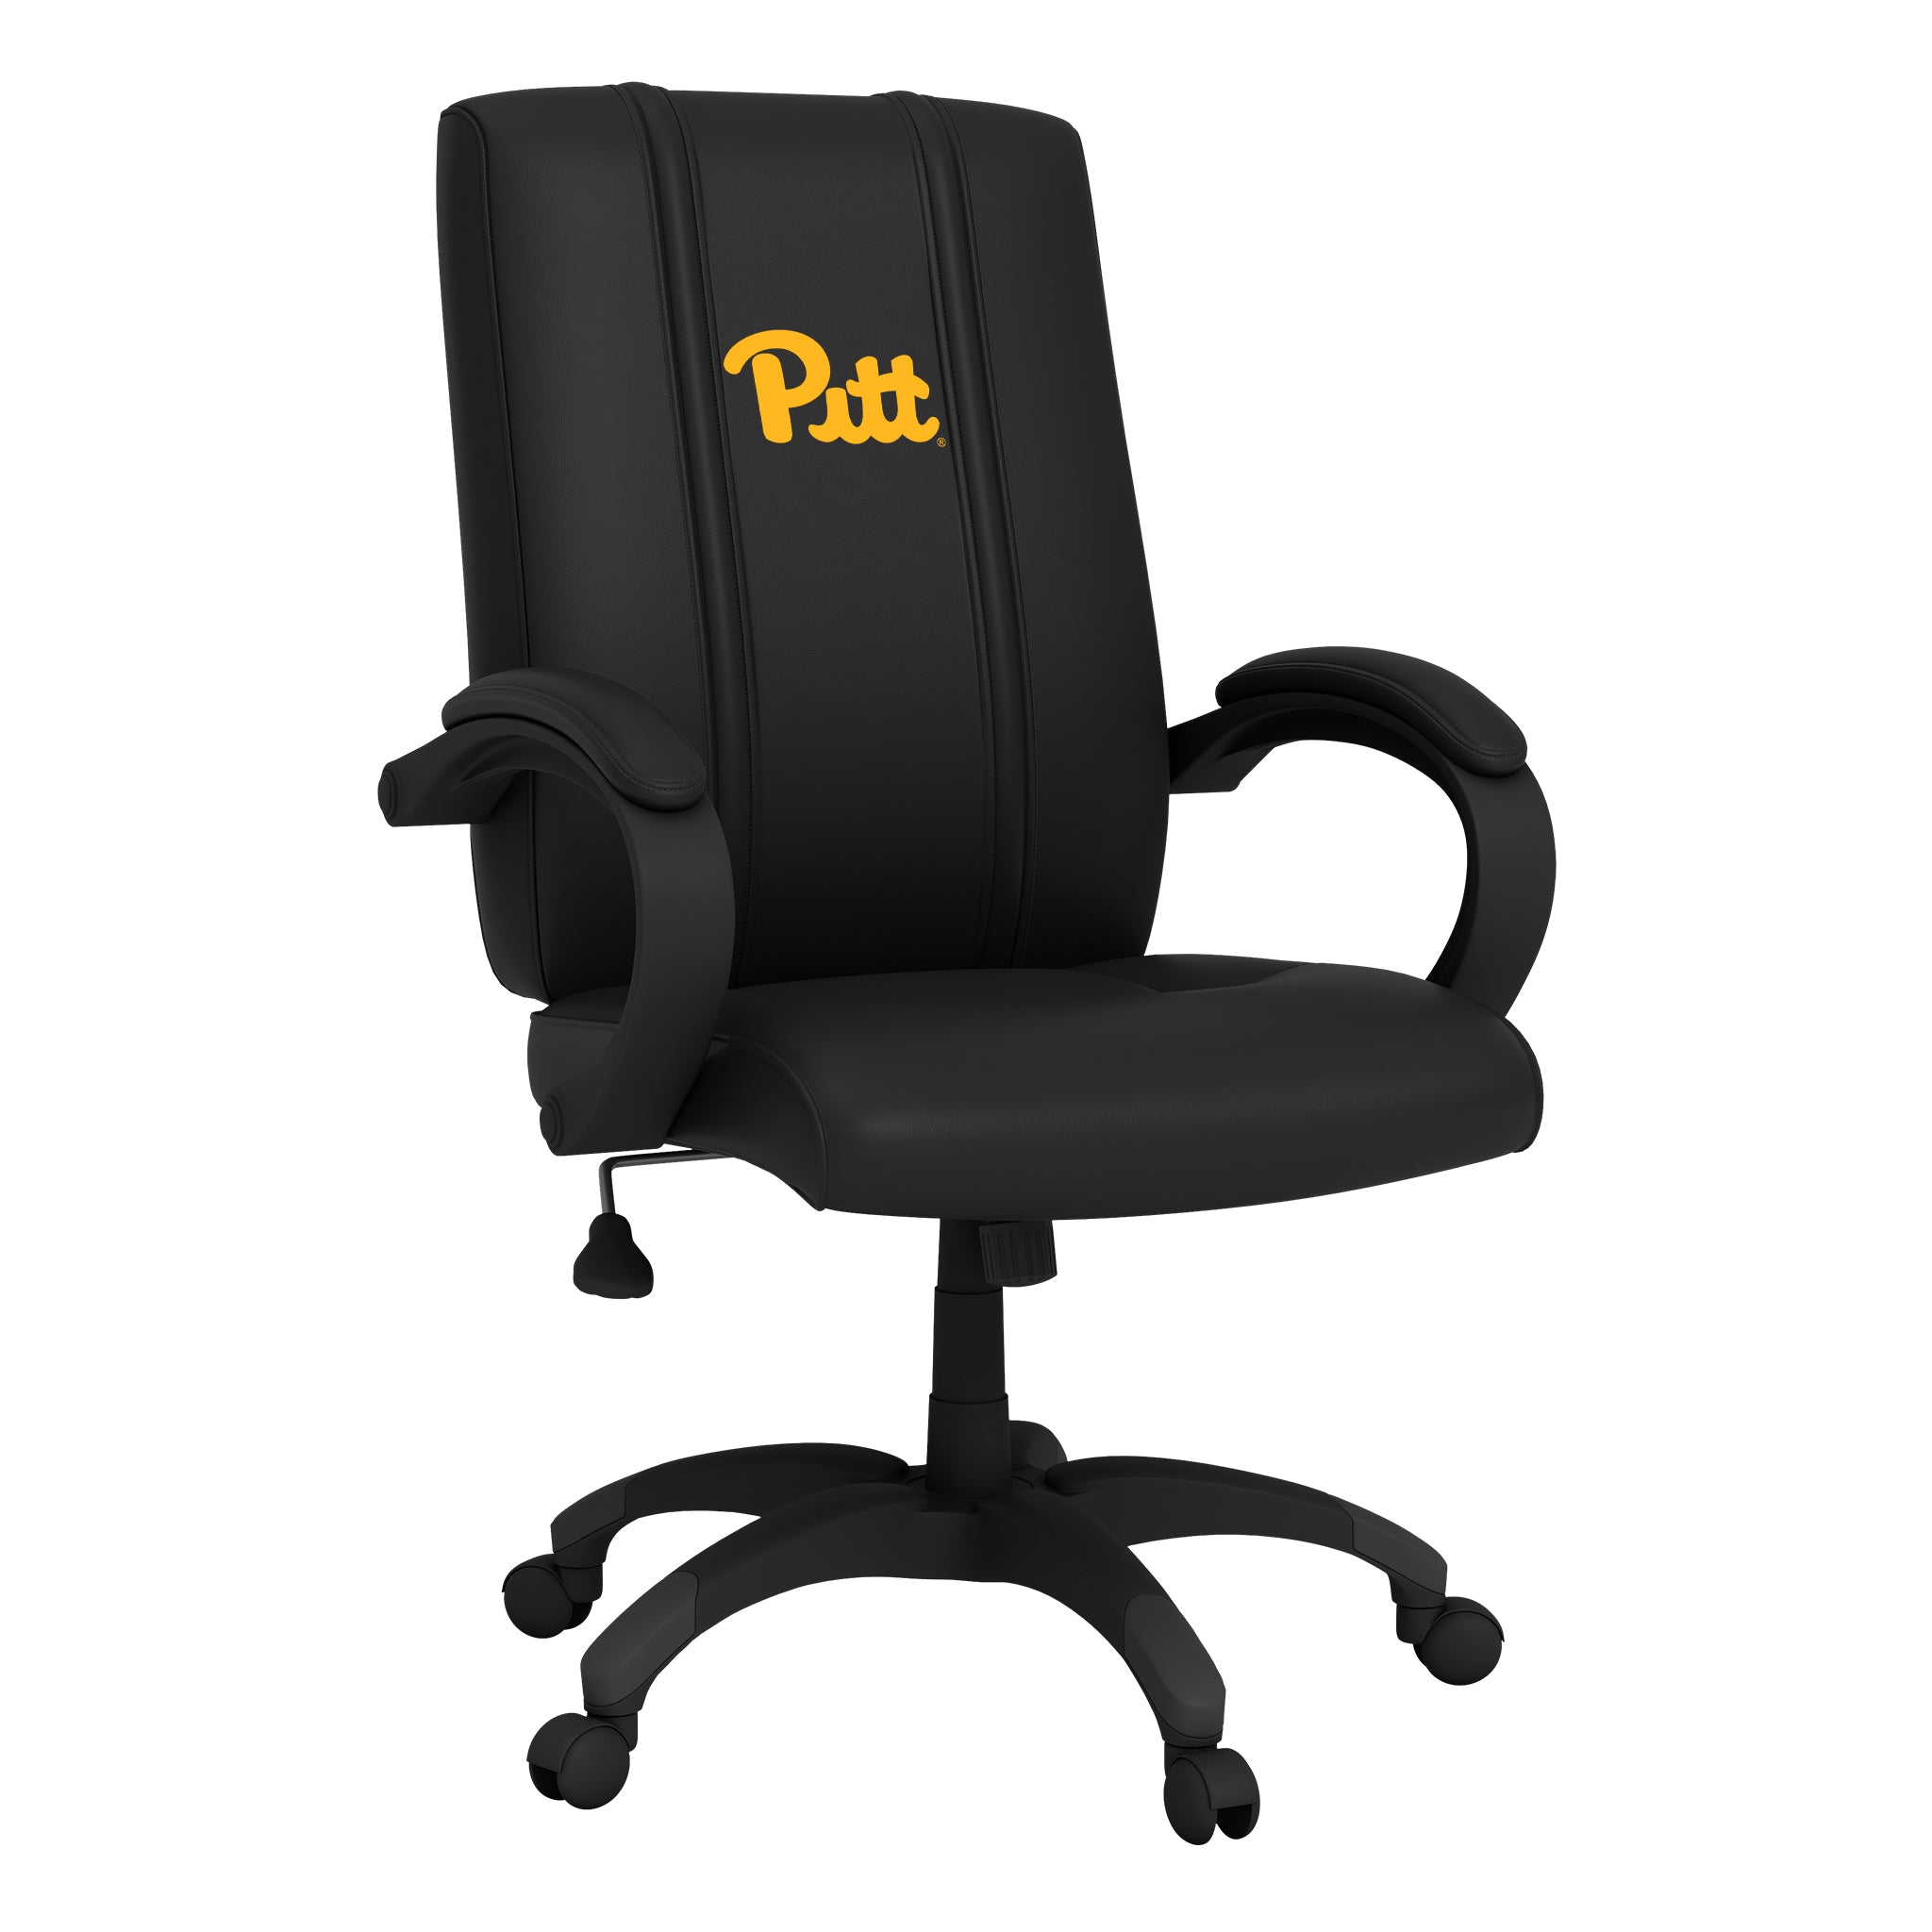 Pittsburgh Panthers Office Chair 1000 with Pittsburgh Panthers Secondary Logo